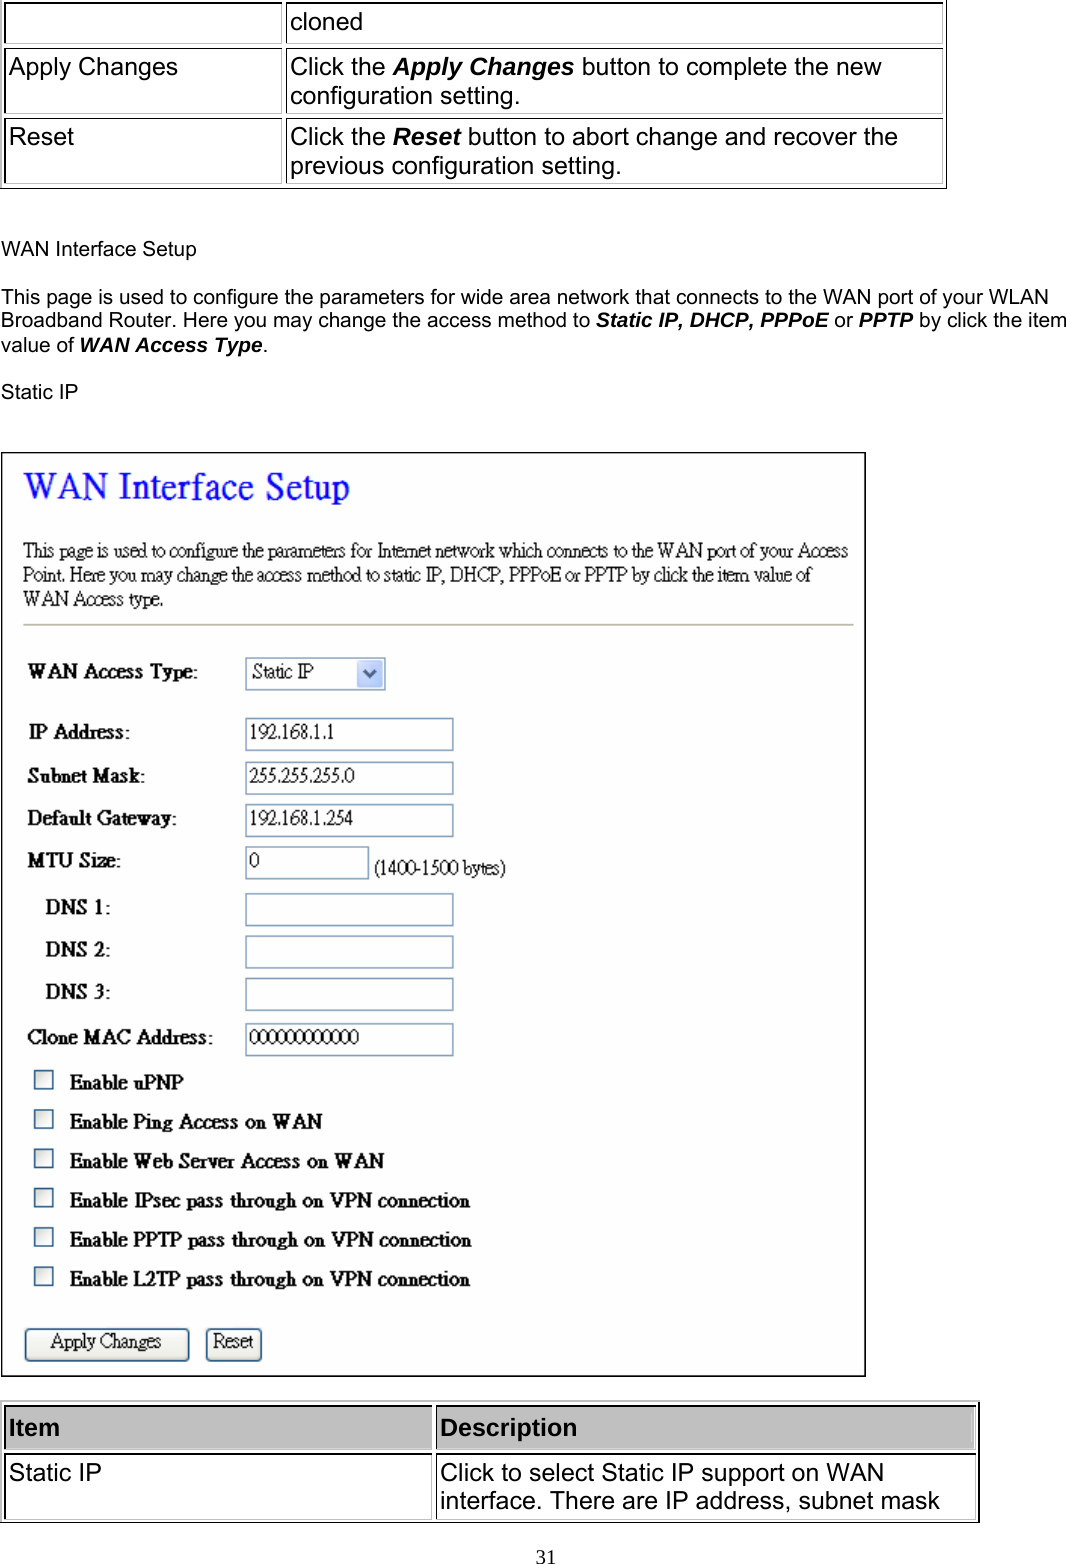 cloned Apply Changes  Click the Apply Changes button to complete the new configuration setting. Reset Click the Reset button to abort change and recover the previous configuration setting.   WAN Interface Setup  This page is used to configure the parameters for wide area network that connects to the WAN port of your WLAN Broadband Router. Here you may change the access method to Static IP, DHCP, PPPoE or PPTP by click the item value of WAN Access Type.  Static IP     Item  Description Static IP  Click to select Static IP support on WAN interface. There are IP address, subnet mask     31